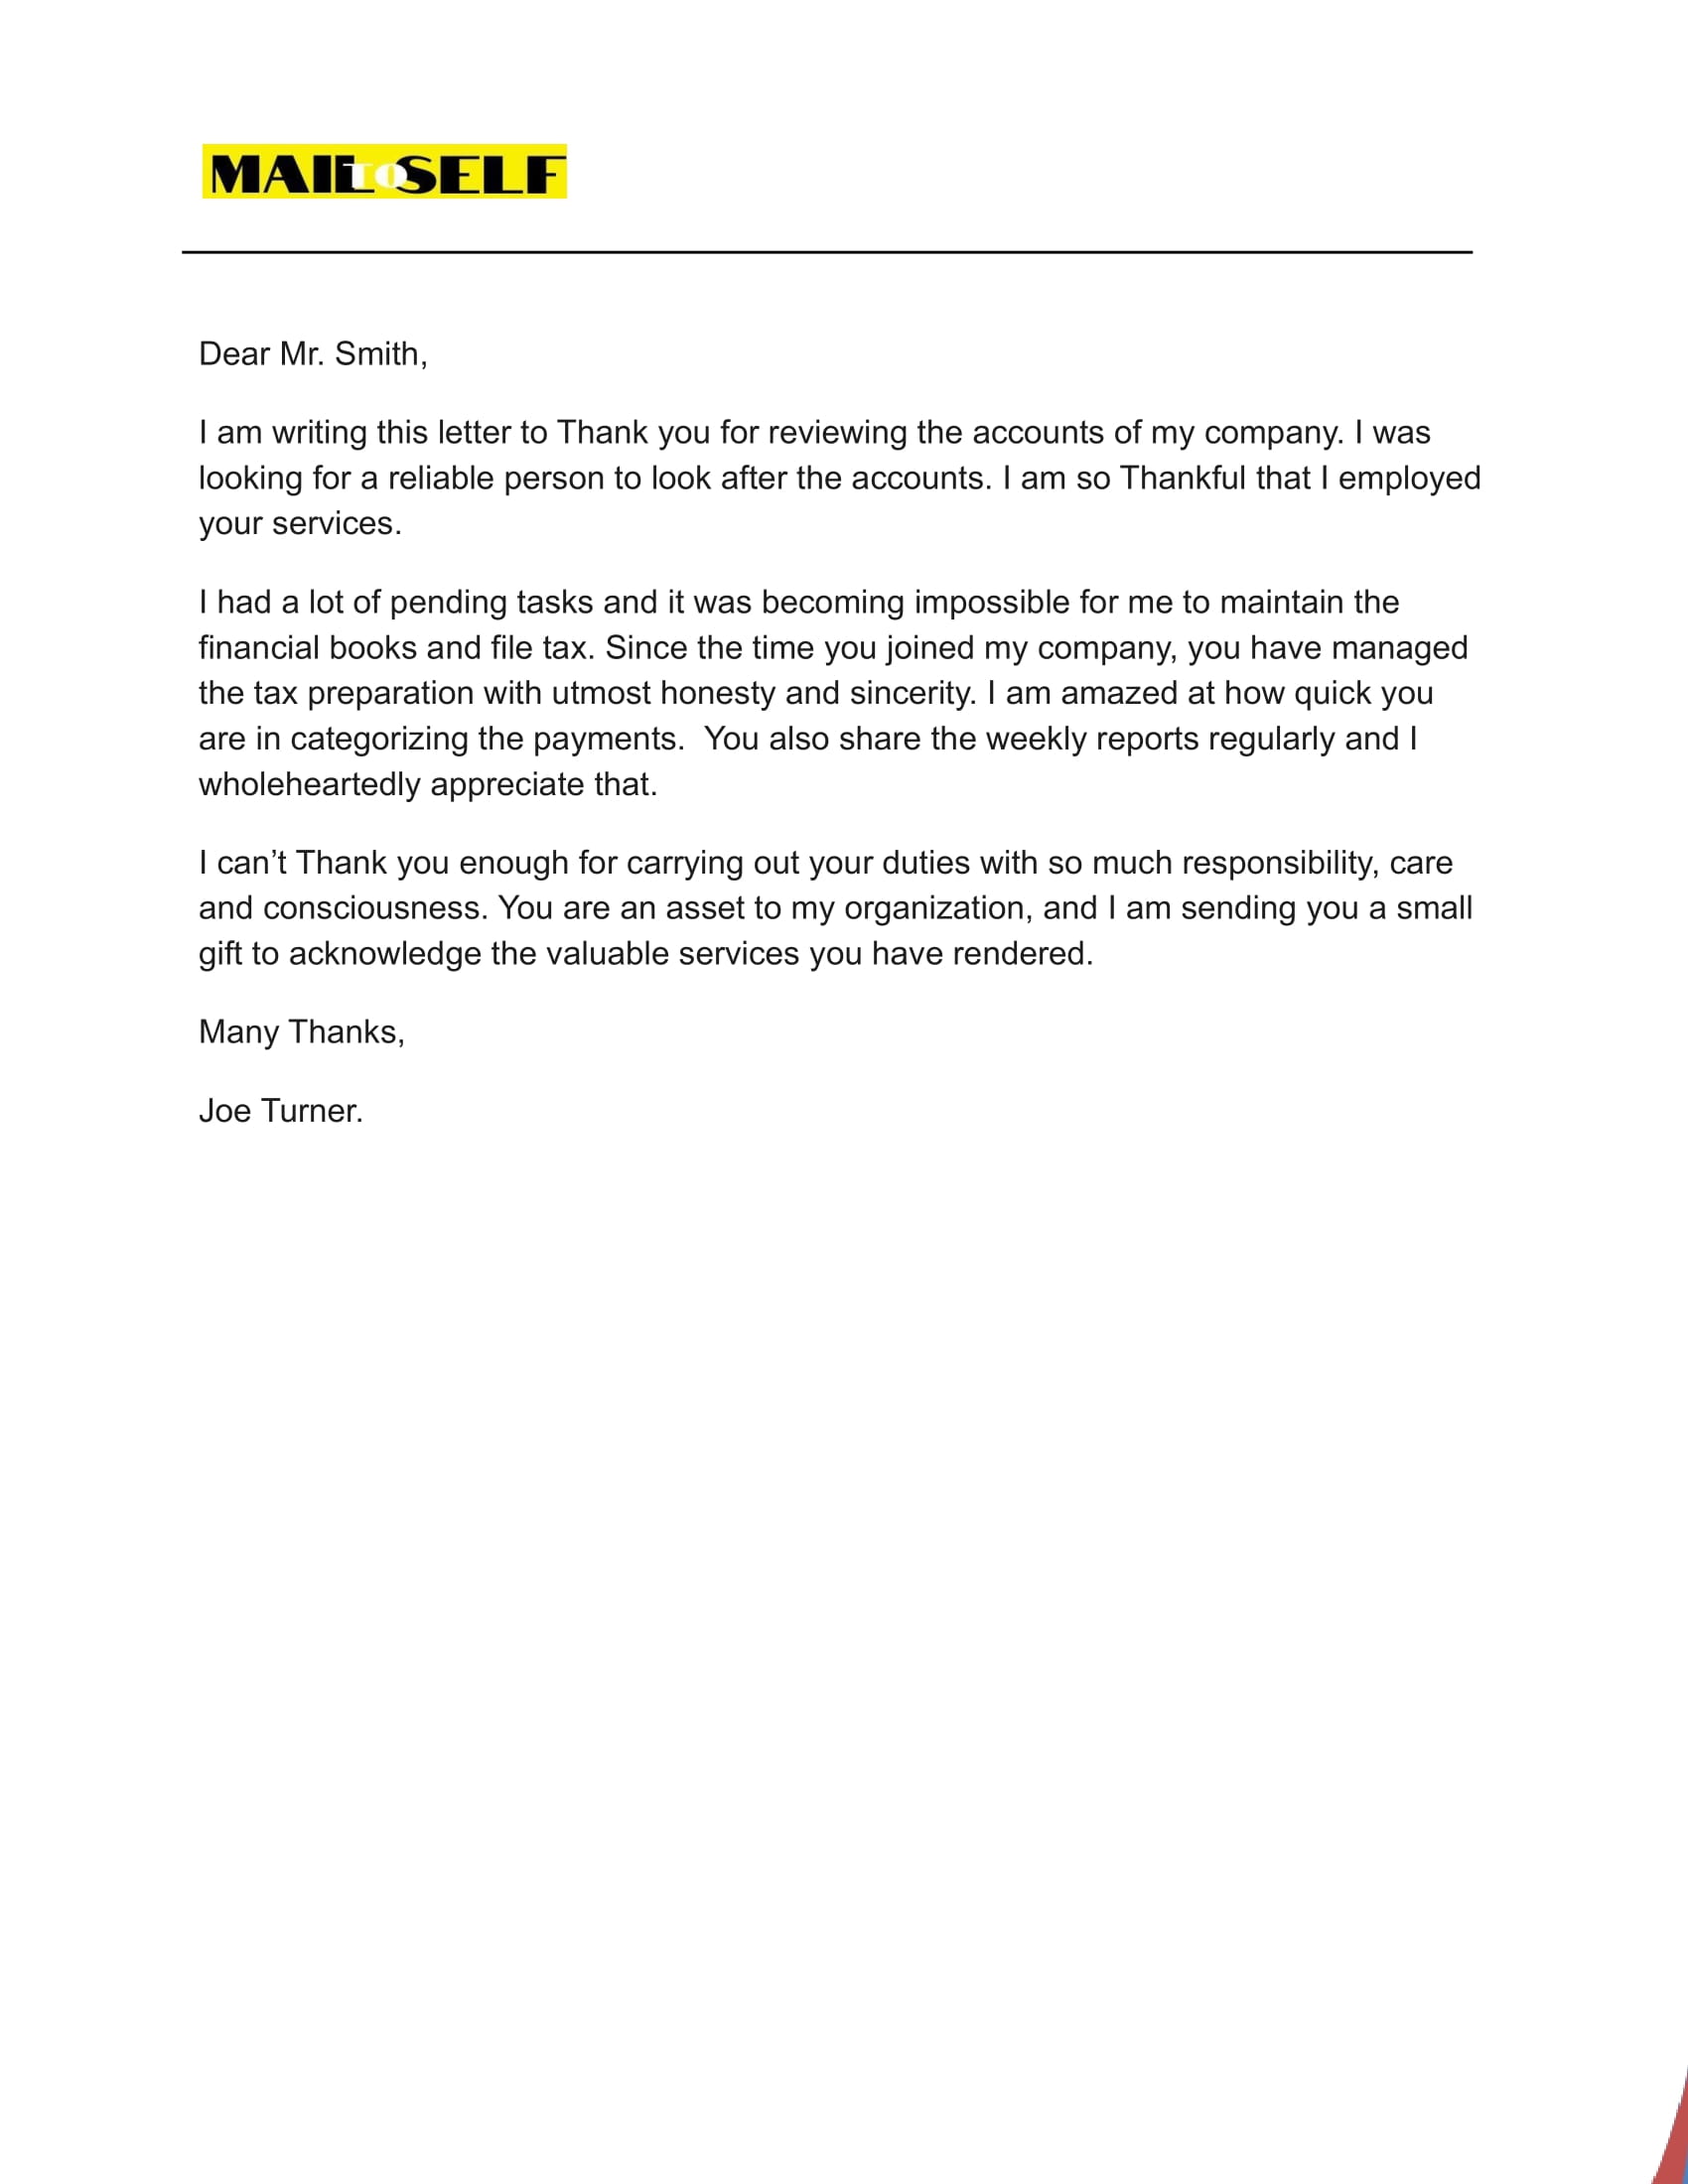 Sample #3 Thank You Letter to Your Accountant for Tax Preparation